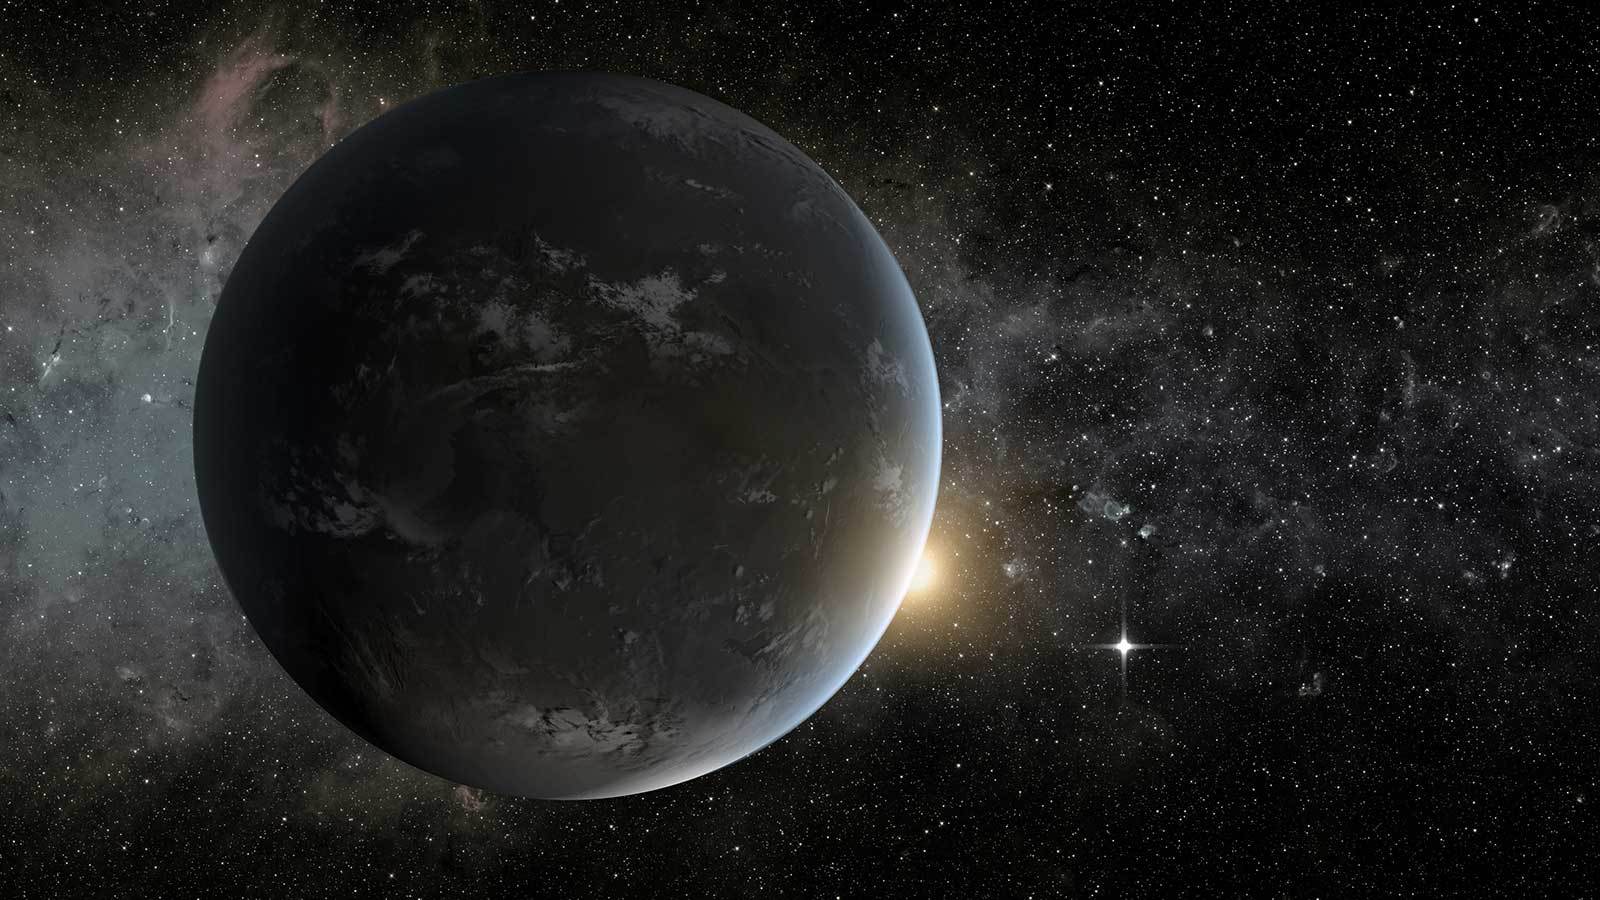 An artist’s illustration of an exoplanet in the Goldilocks Zone.